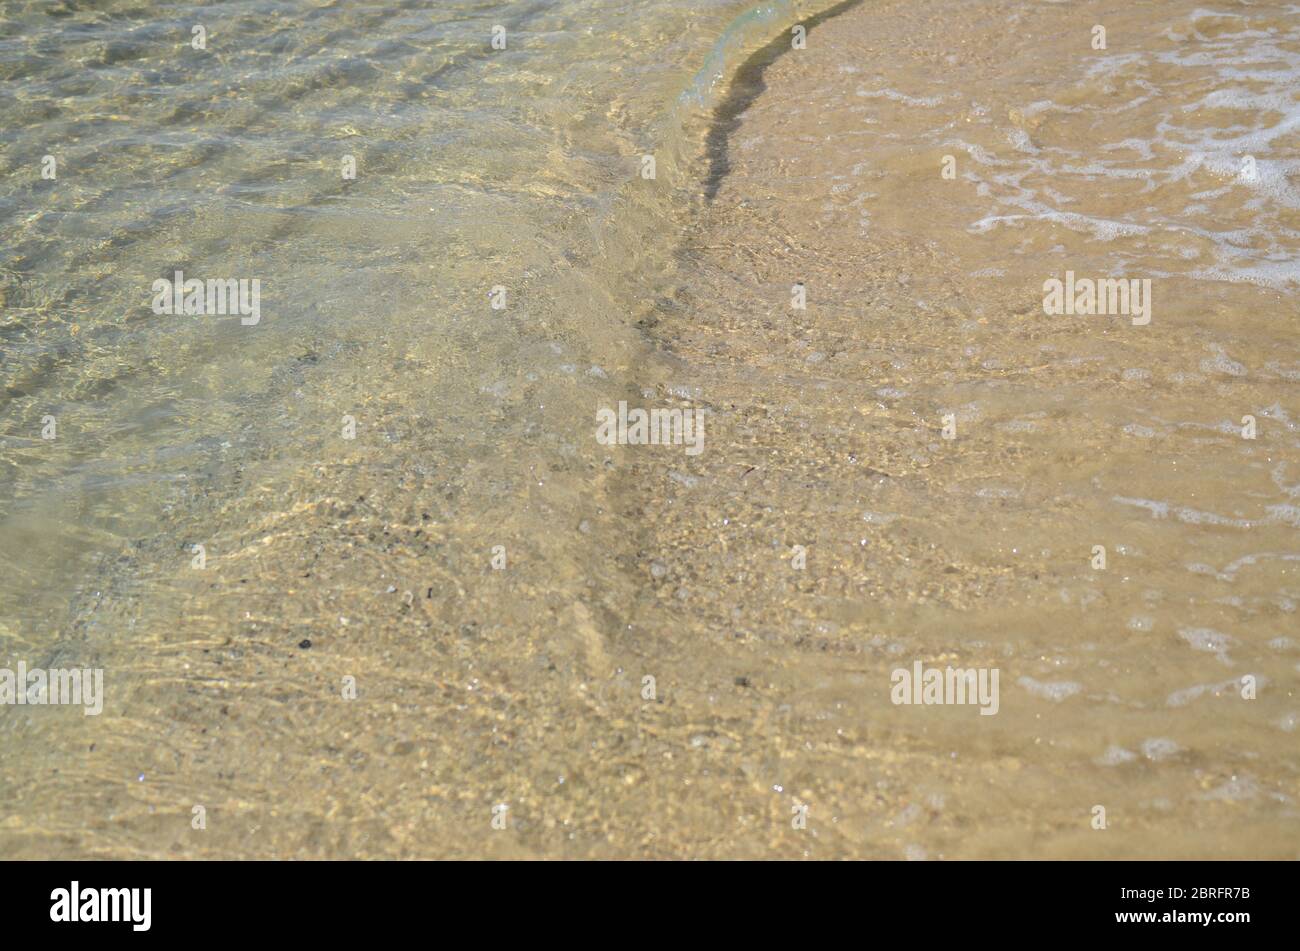 Patterns of movement of water in the pool. Stock Photo